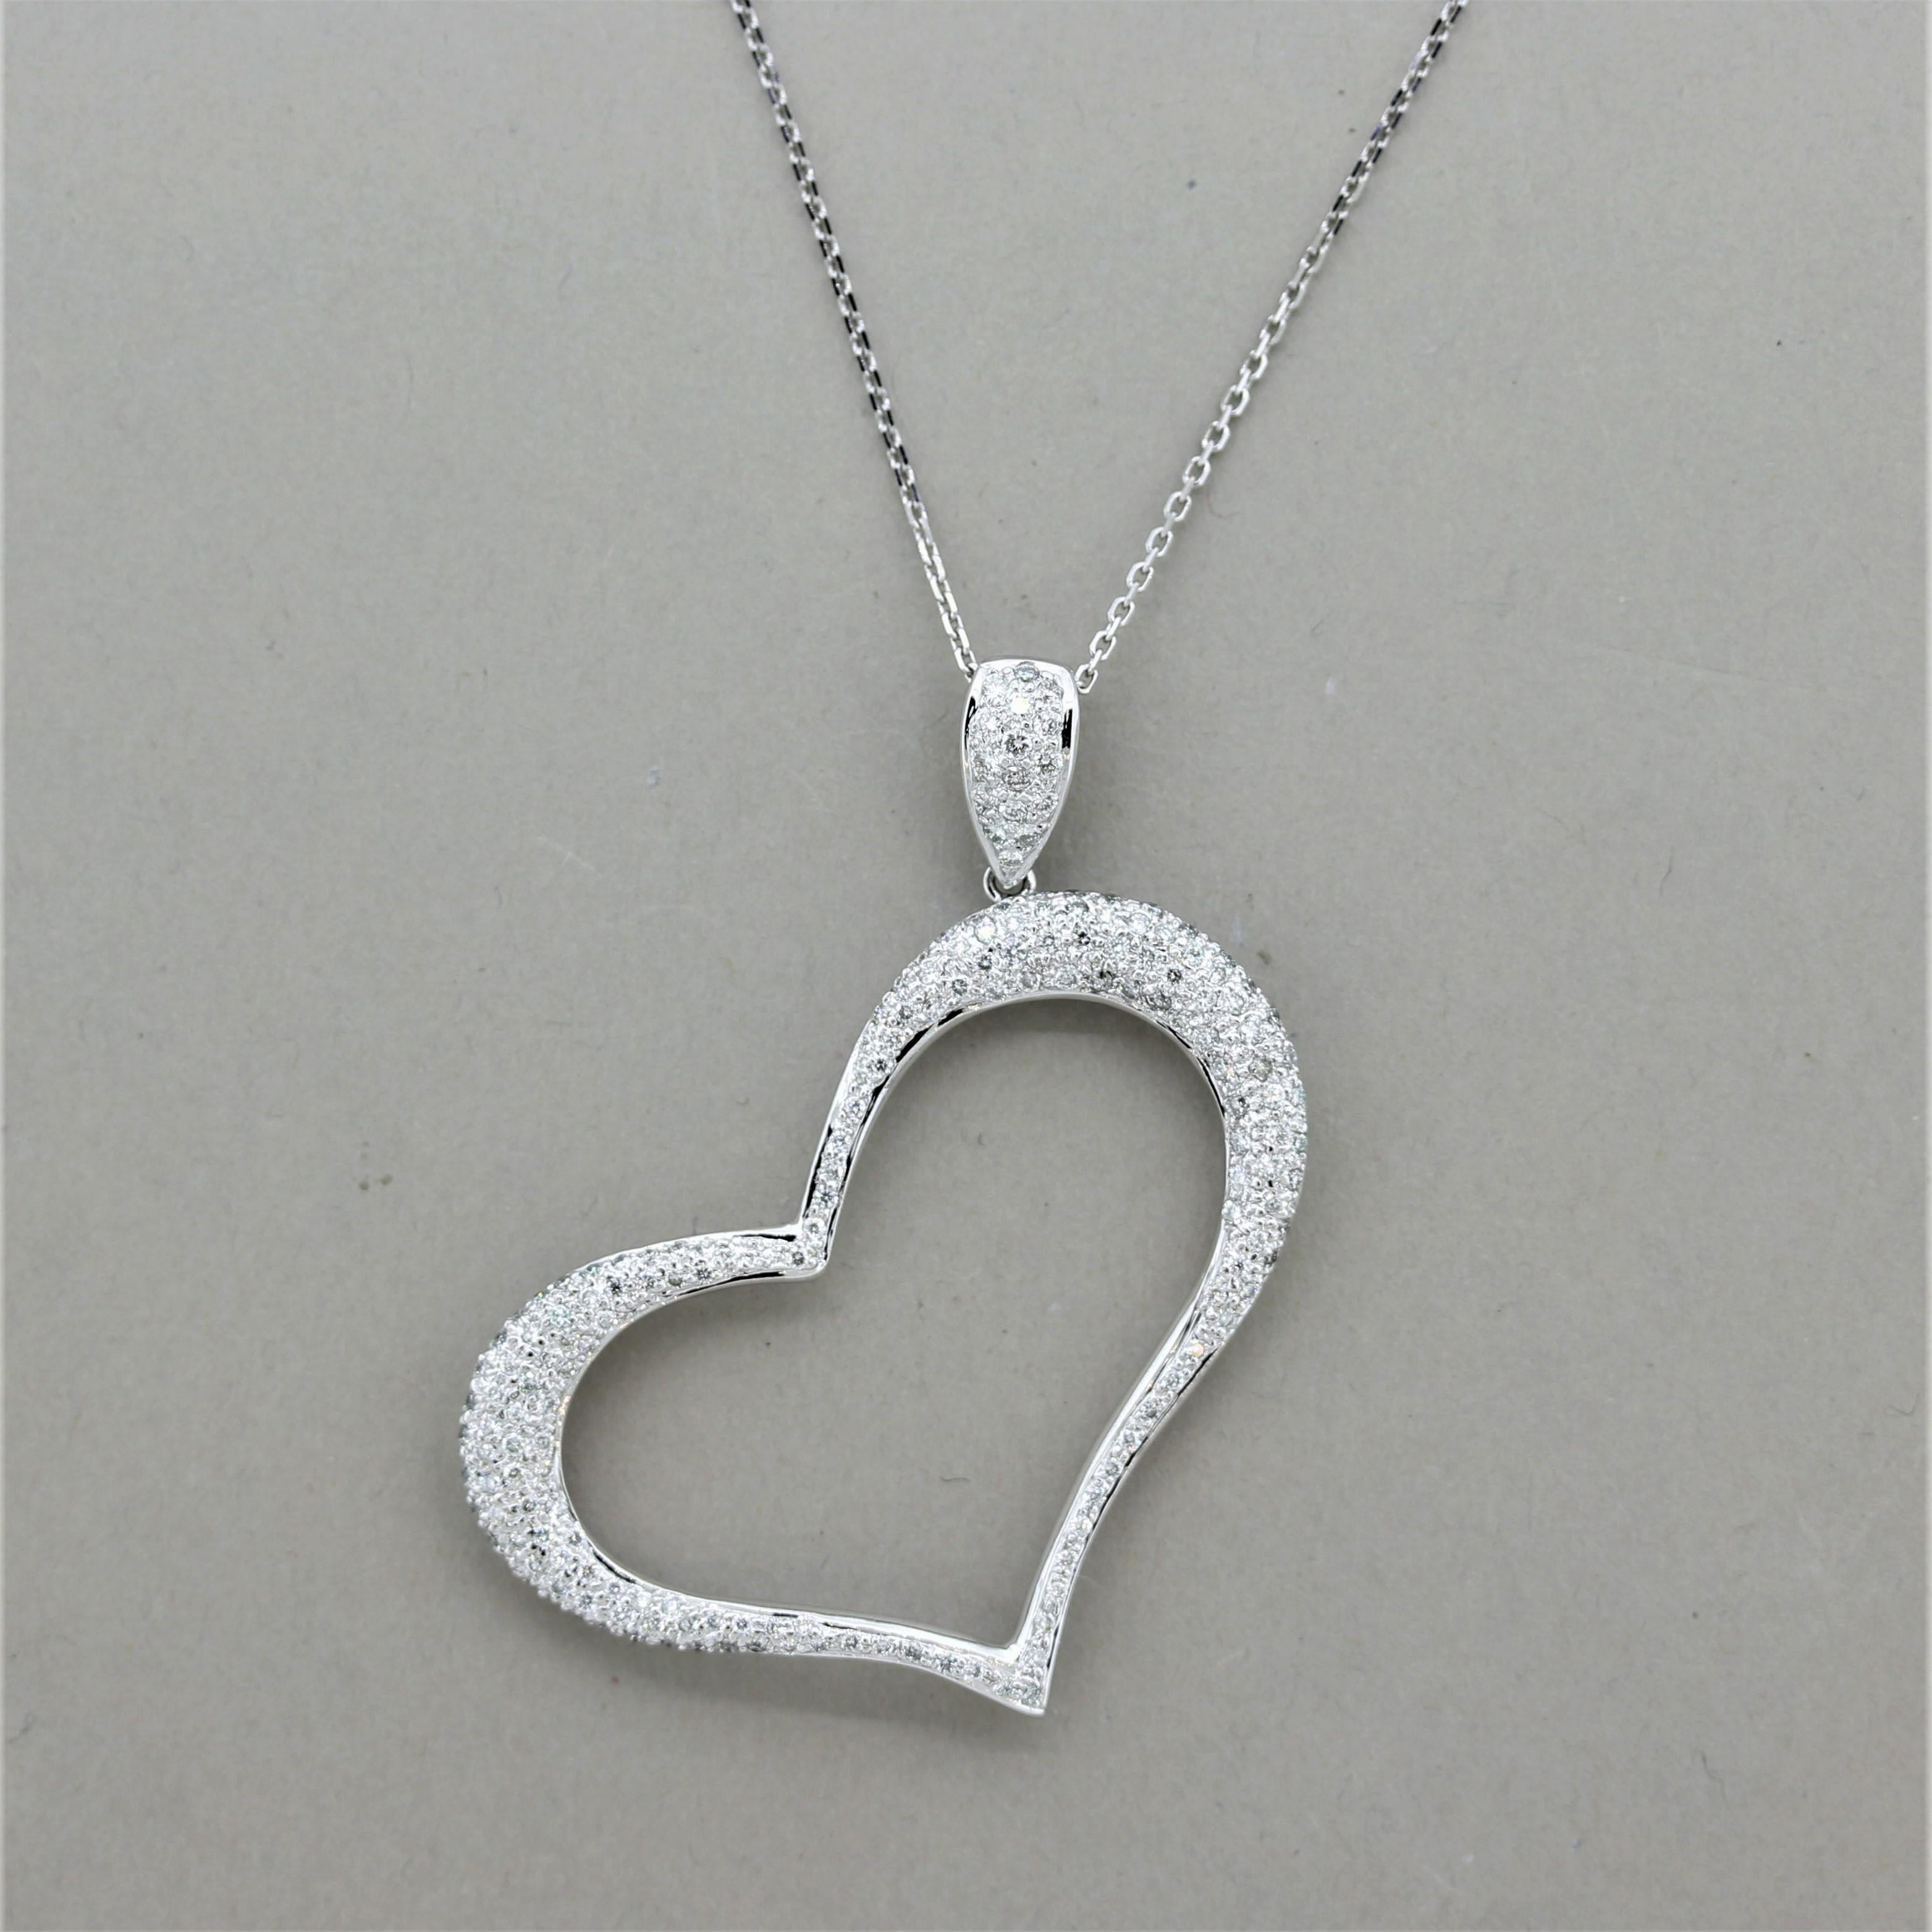 A sweet and larger sized heart pendant which is tilted slightly on its side and dropped from the top bail. It features 1.49 carats of round brilliant-cut diamonds which are set around the heart and bail. Made in 18k white gold and ready to be worn